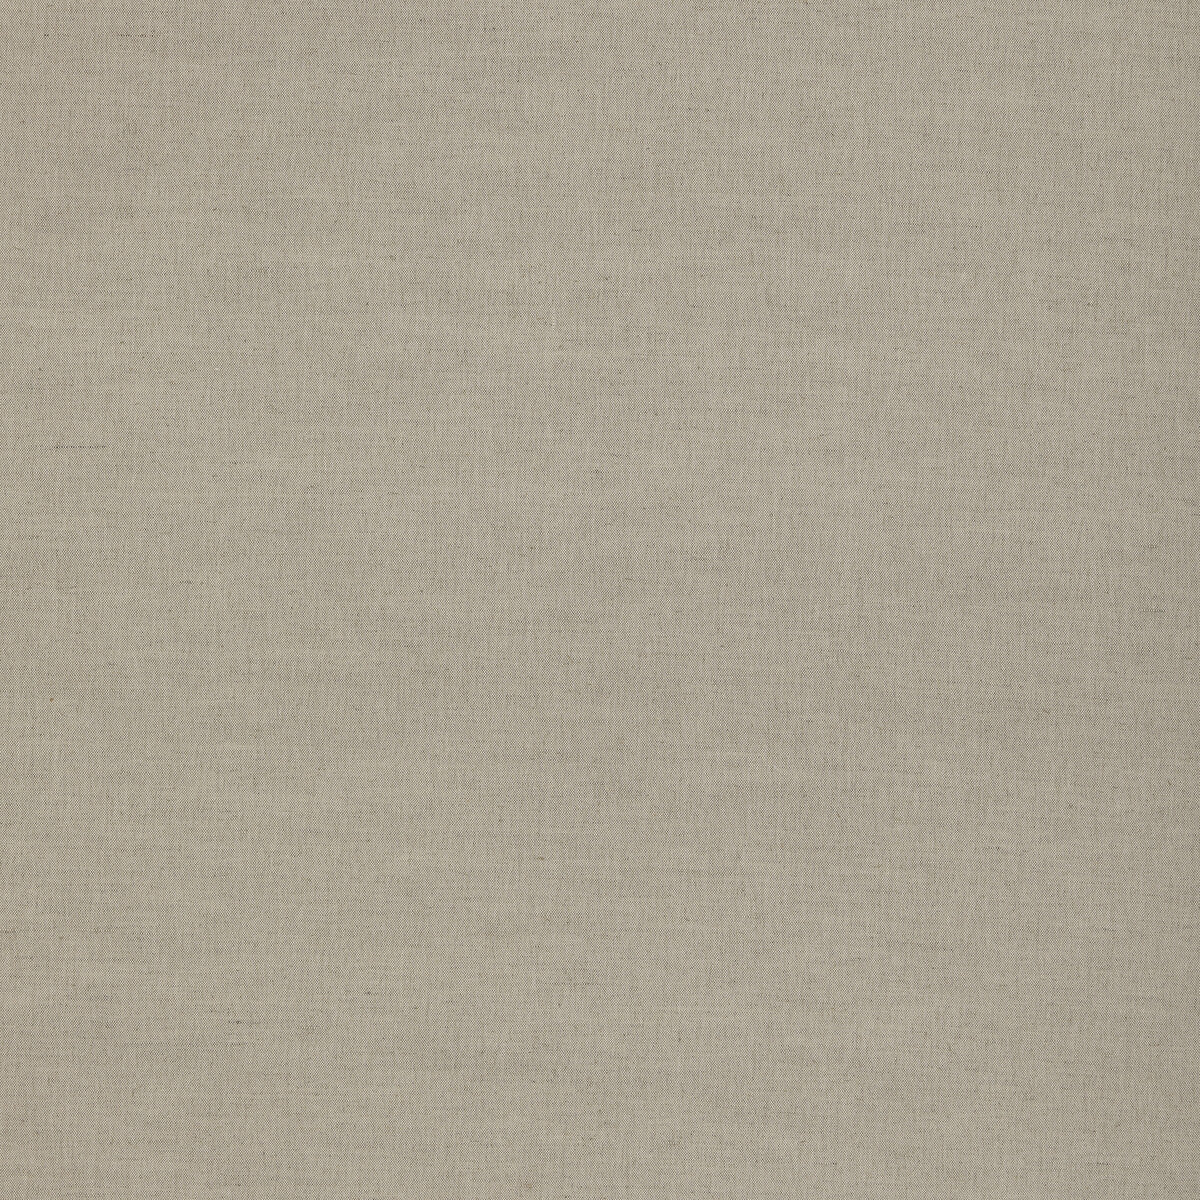 Tor fabric in parchment color - pattern ED85398.225.0 - by Threads in the Quintessential Naturals collection